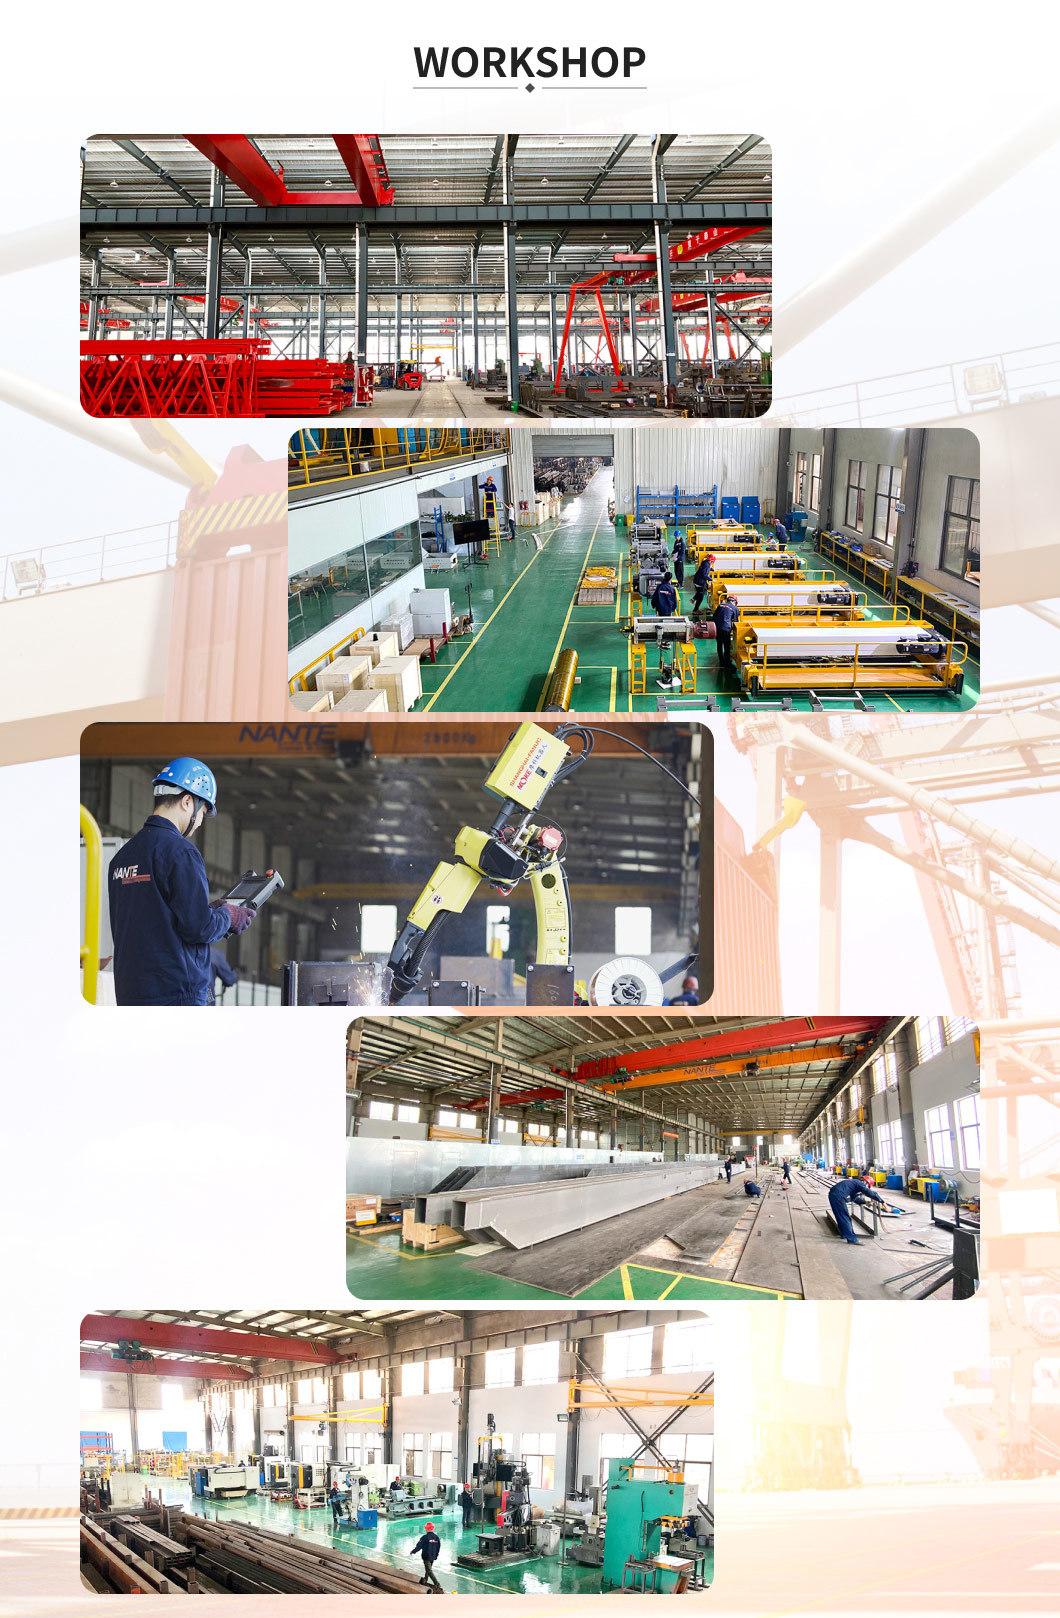 Hot Selling 1~20t Double Girder Overhead Crane with Great Supervision